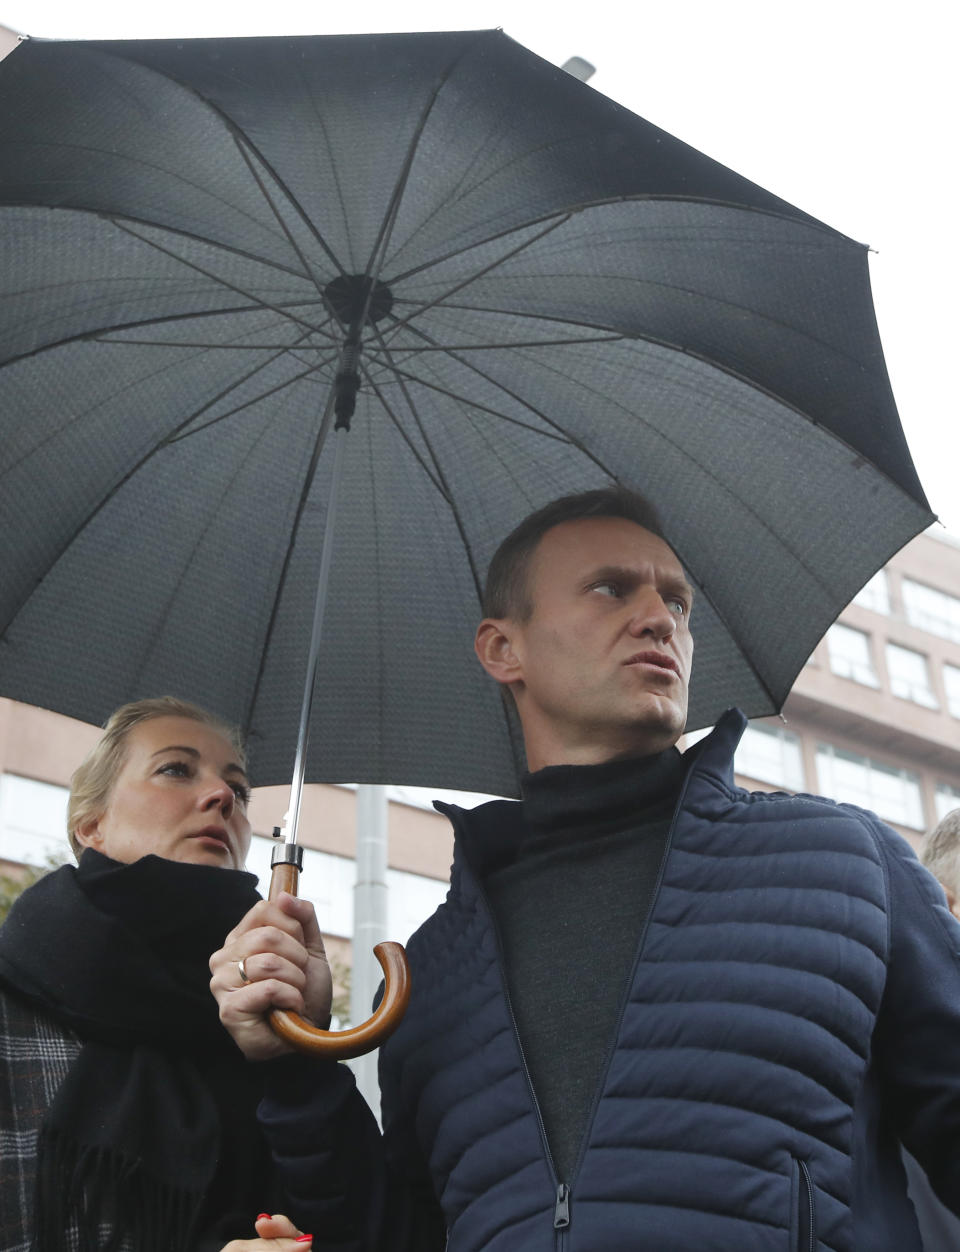 Russian opposition leader Alexei Navalny and his wife Yulia, attend a rally to support political prisoners in Moscow, Russia, Sunday, Sept. 29, 2019. (AP Photo/Dmitri Lovetsky)